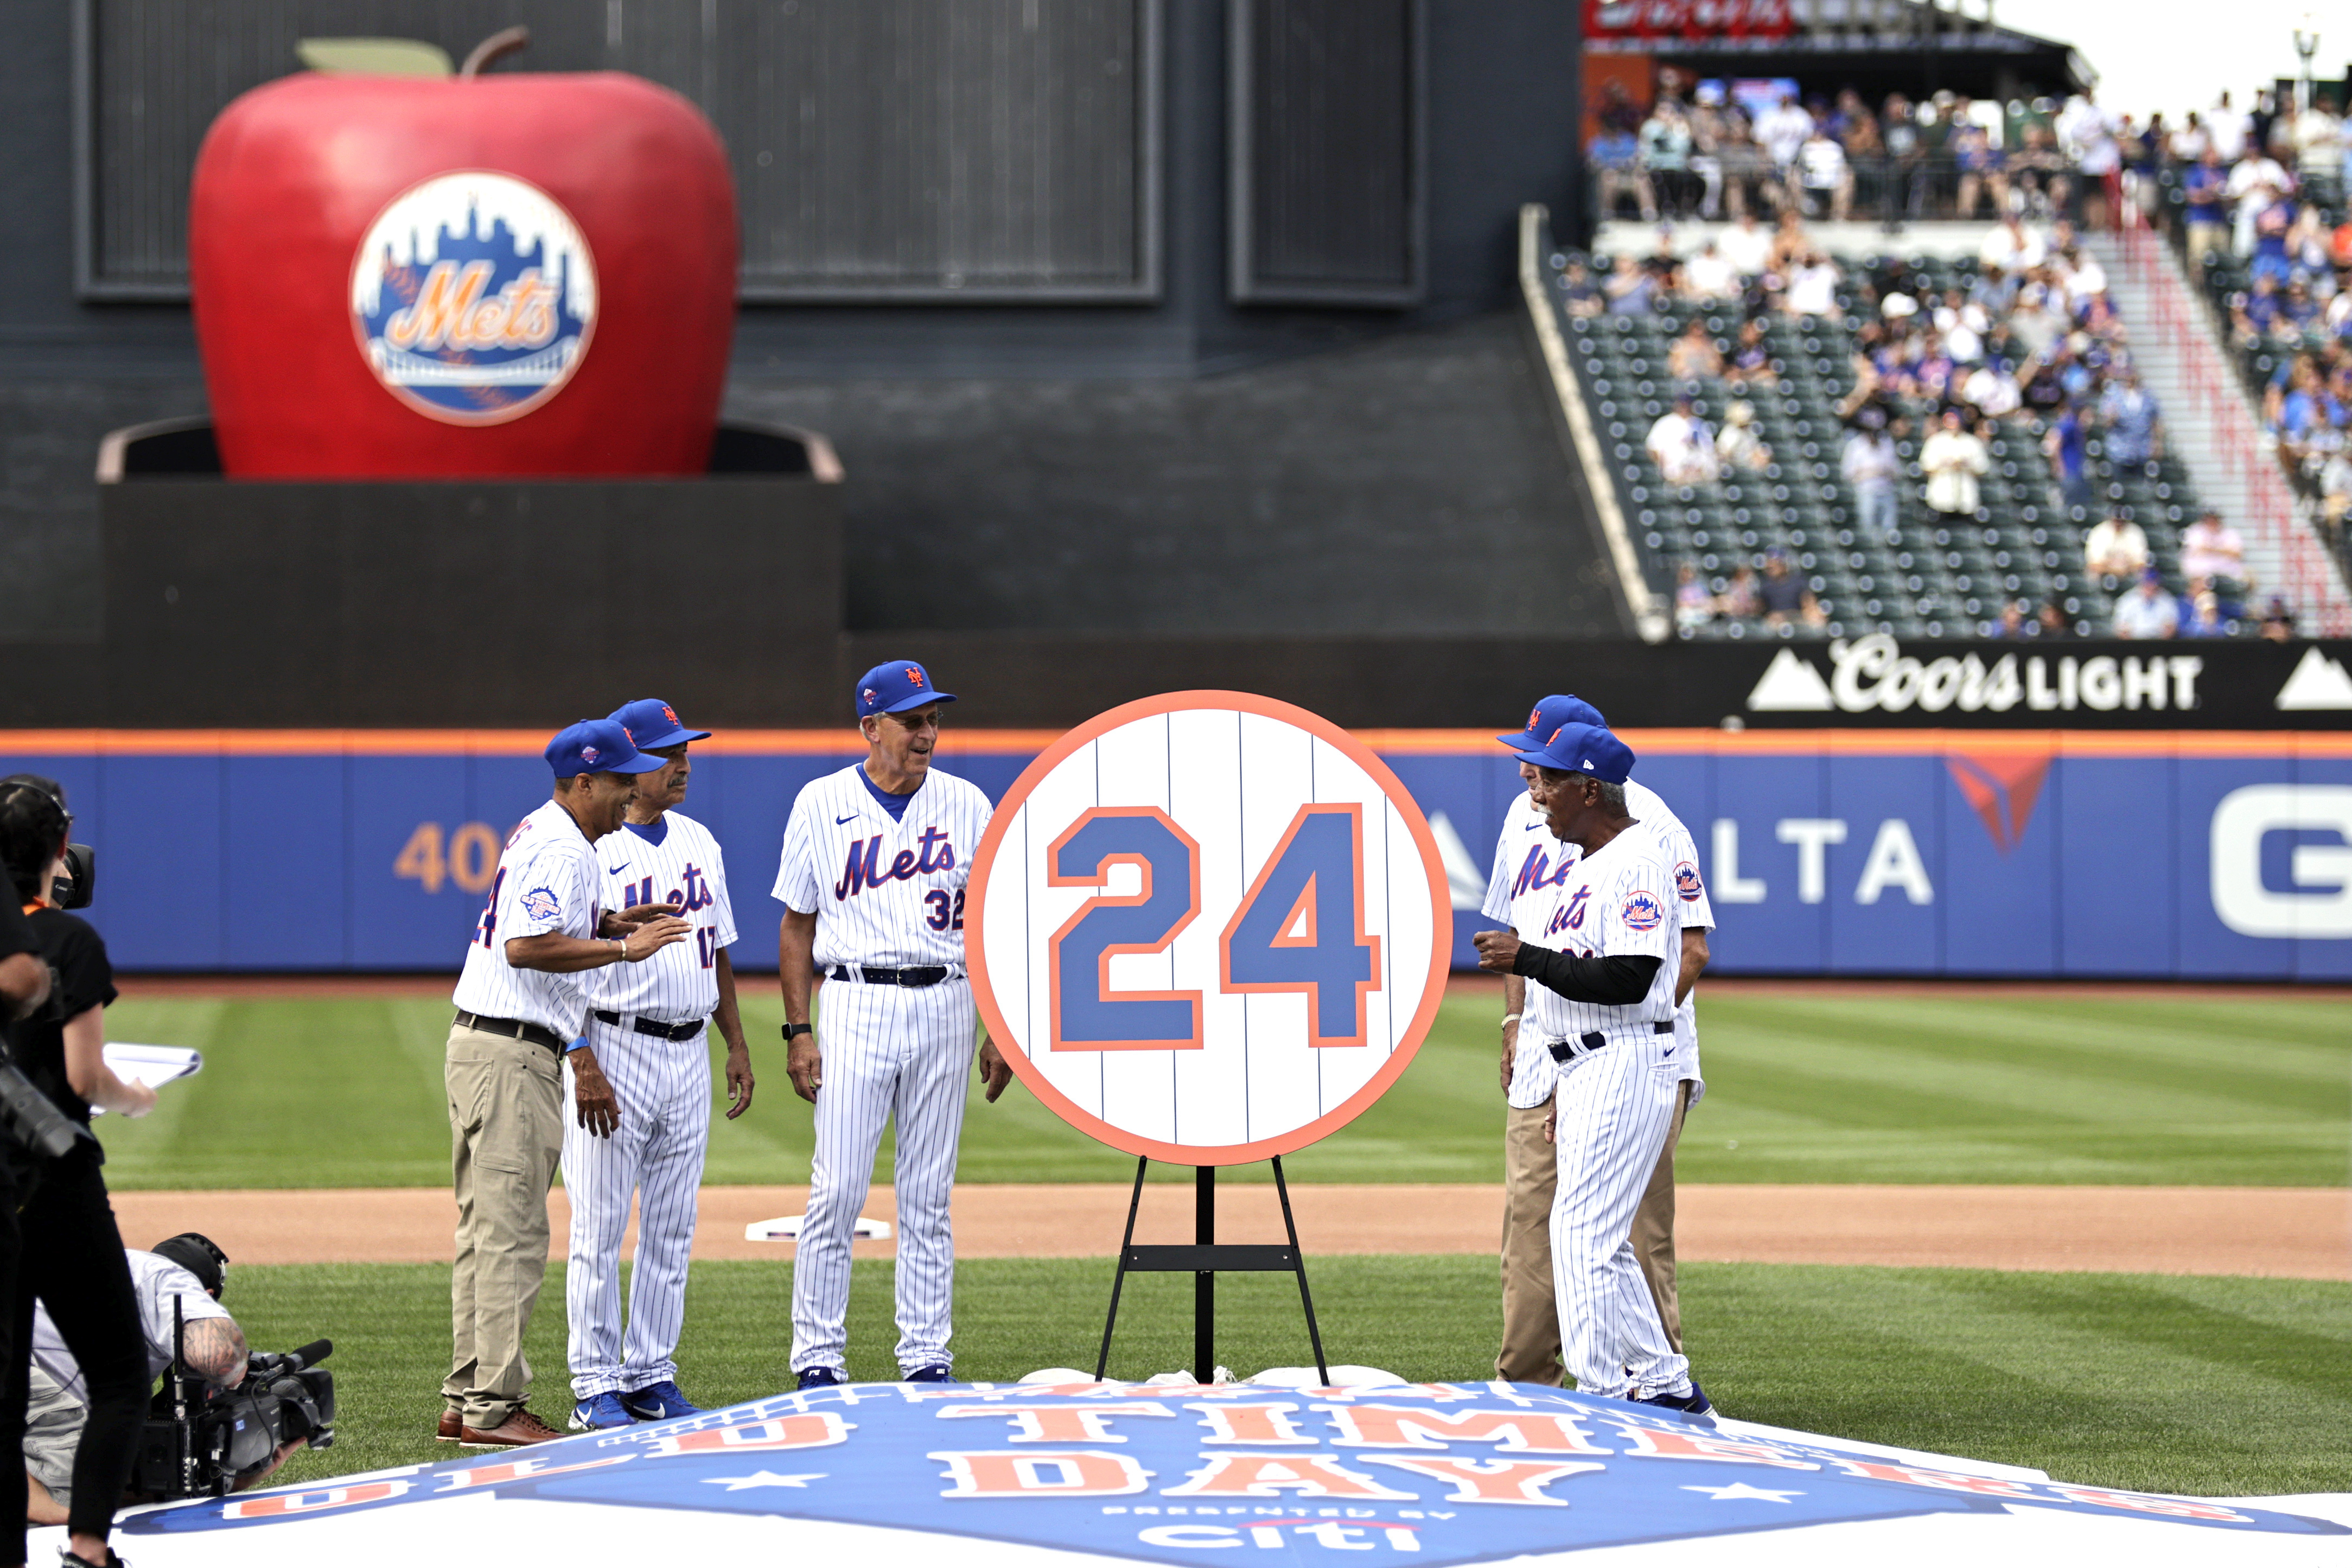 How to think Mets fans feel about Darryl Strawberry and Dwight Gooden  having their numbers retired - Quora